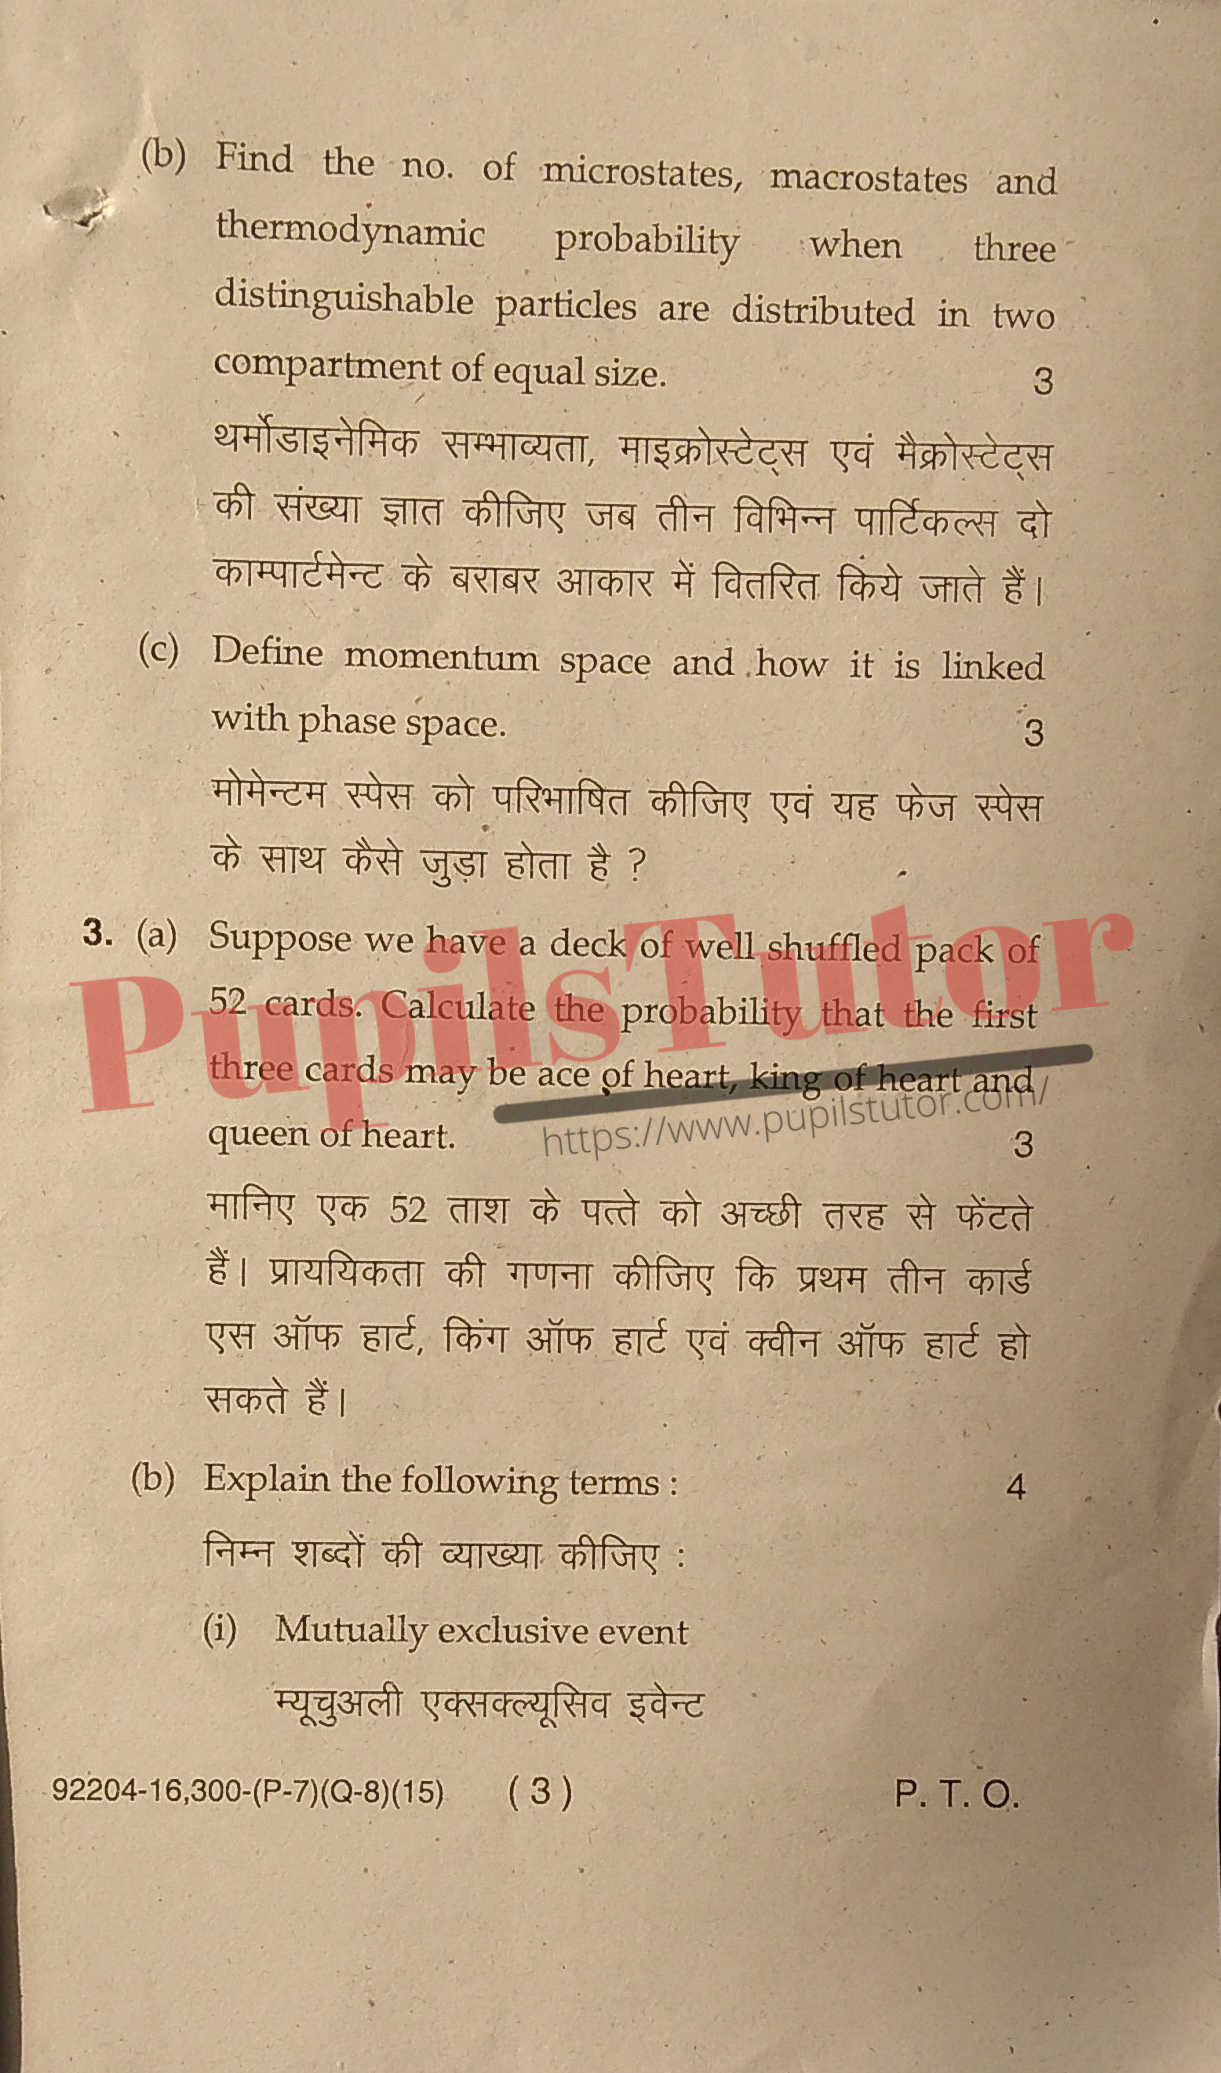 Free Download PDF Of M.D. University B.Sc. [Physics] Fourth Semester Latest Question Paper For Statistical Mechanics Subject (Page 3) - https://www.pupilstutor.com